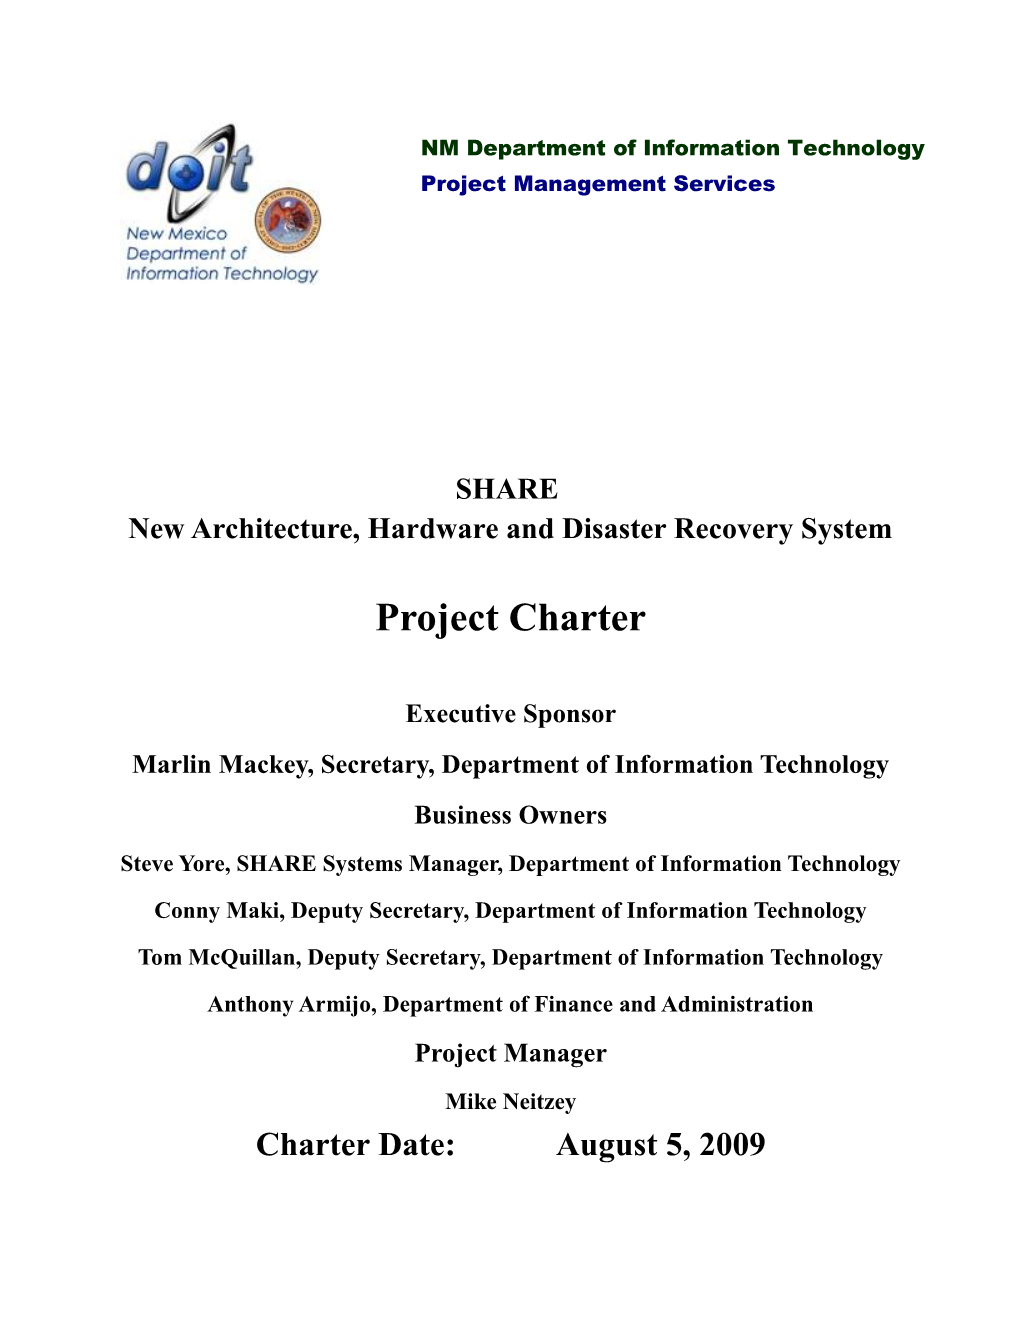 Project Chartershare Upgrade